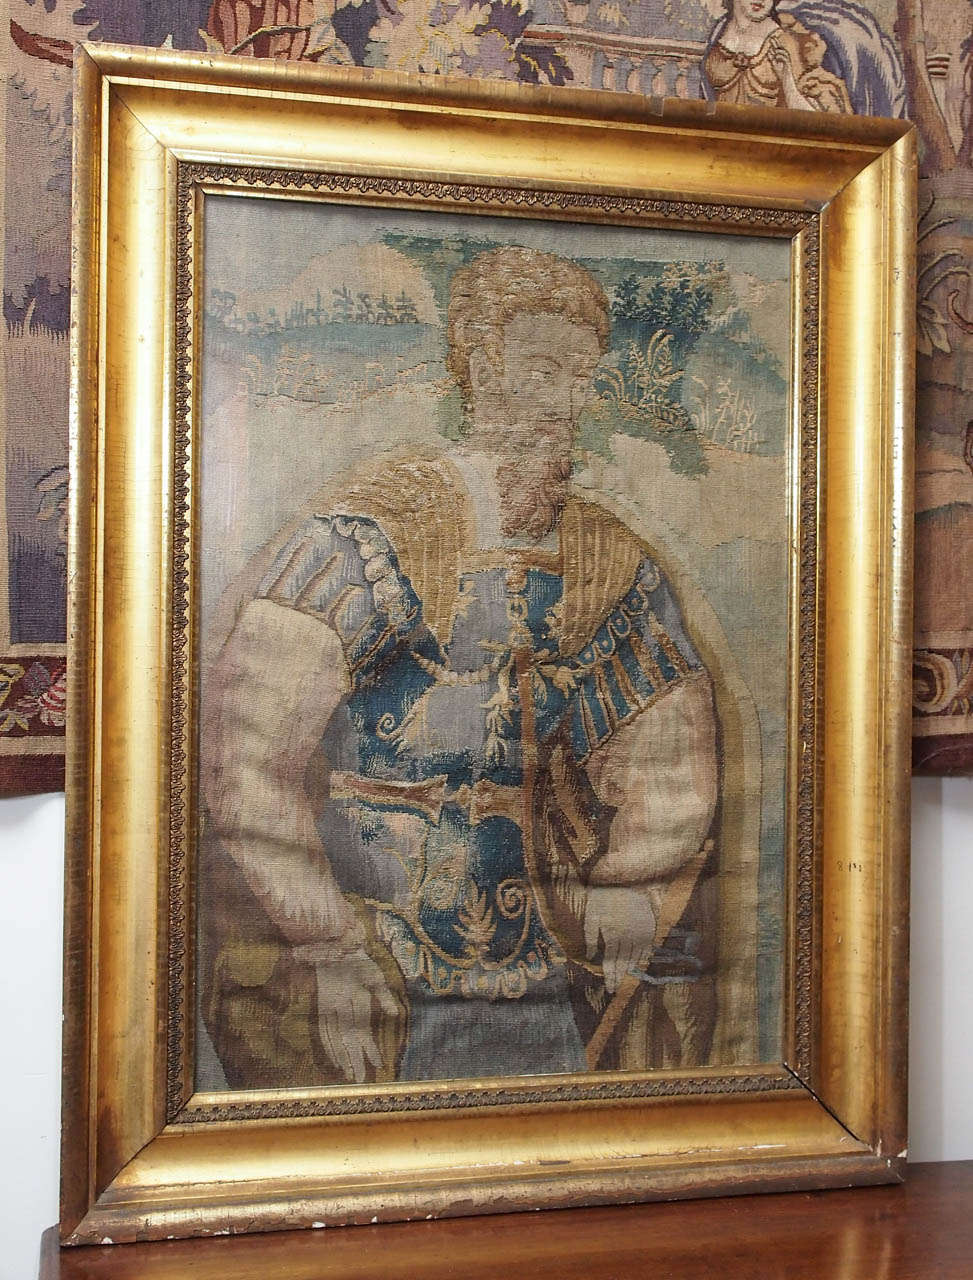 17th c. Flemish Tapestry fragment in 19th c. water gilt frame with glass covering.